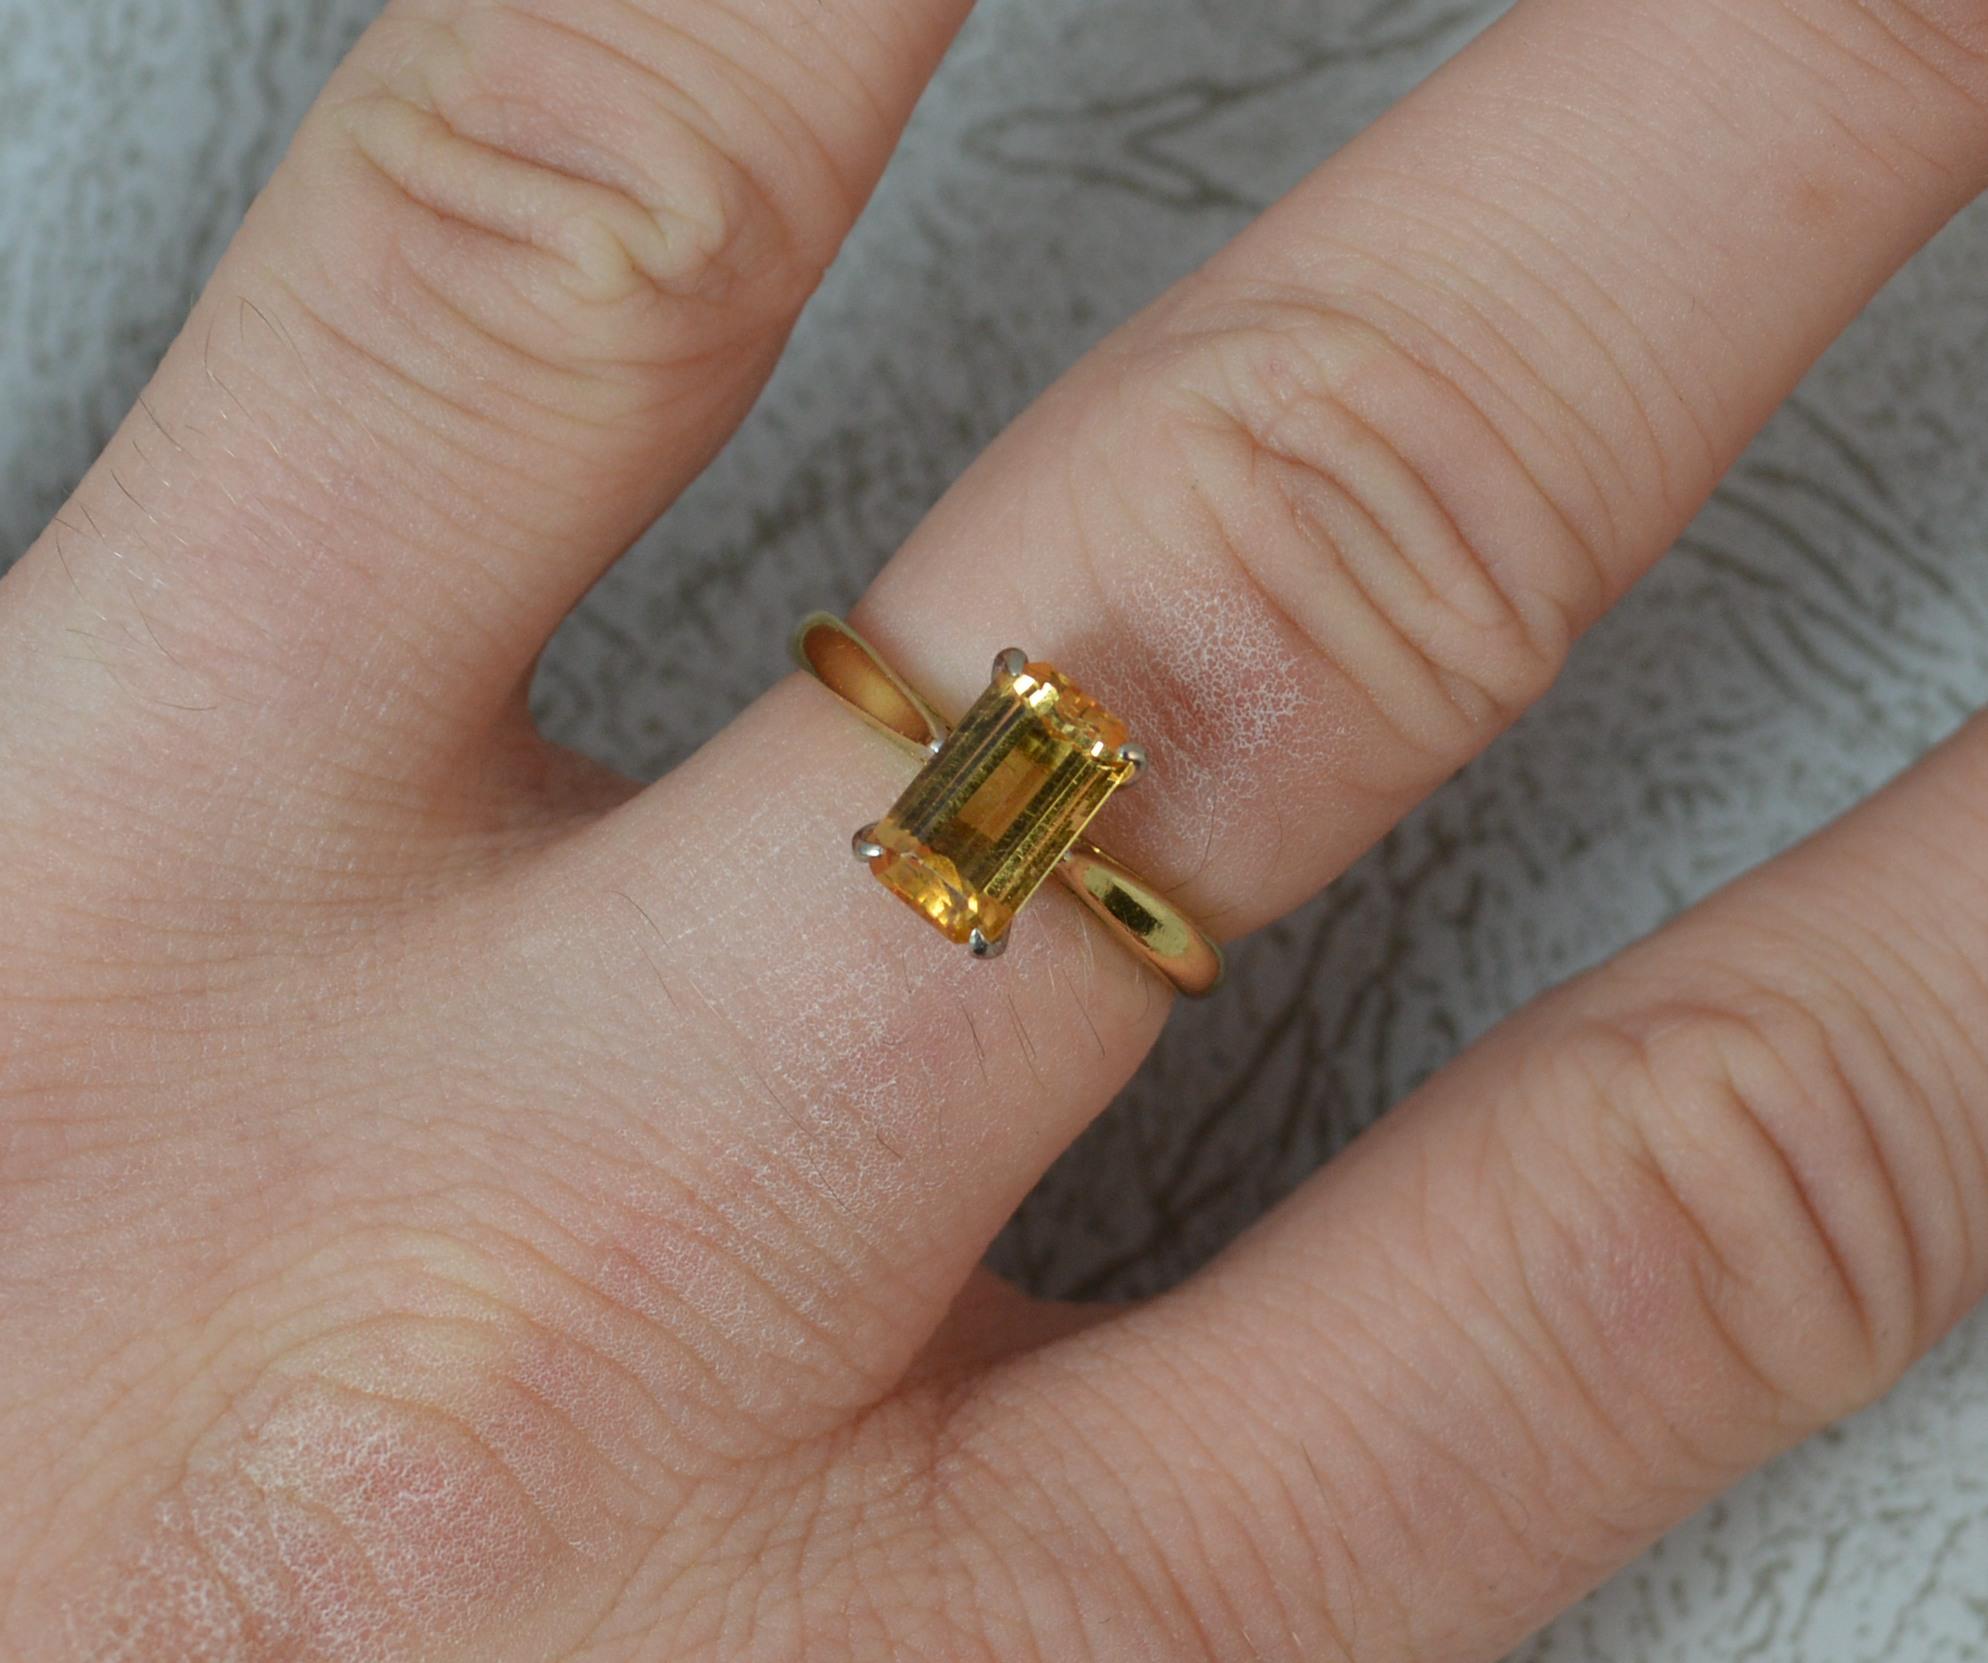 A stunning Topaz solitaire ring in 18ct Gold.
SIZE ; N UK, 6 3/4 US
​Single stone, emerald cut in four white gold claw setting.
5.2mm x 9.1mm golden yellow topaz. Protruding 6mm off the finger.

CONDITION ; Excellent. Clean and solid shank. Well set